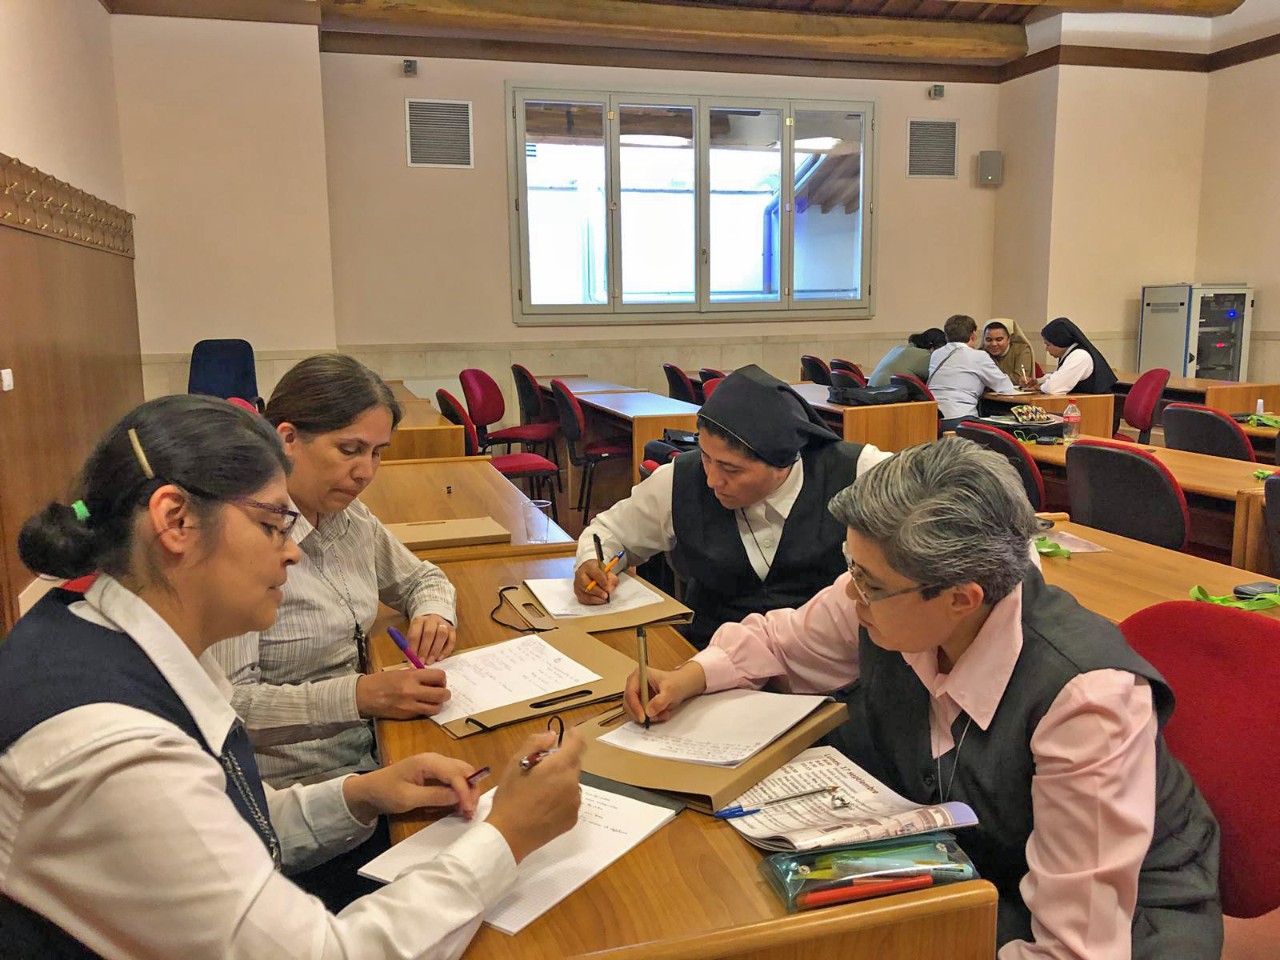 Woods College Latin American Sisters in Rome: a group studying